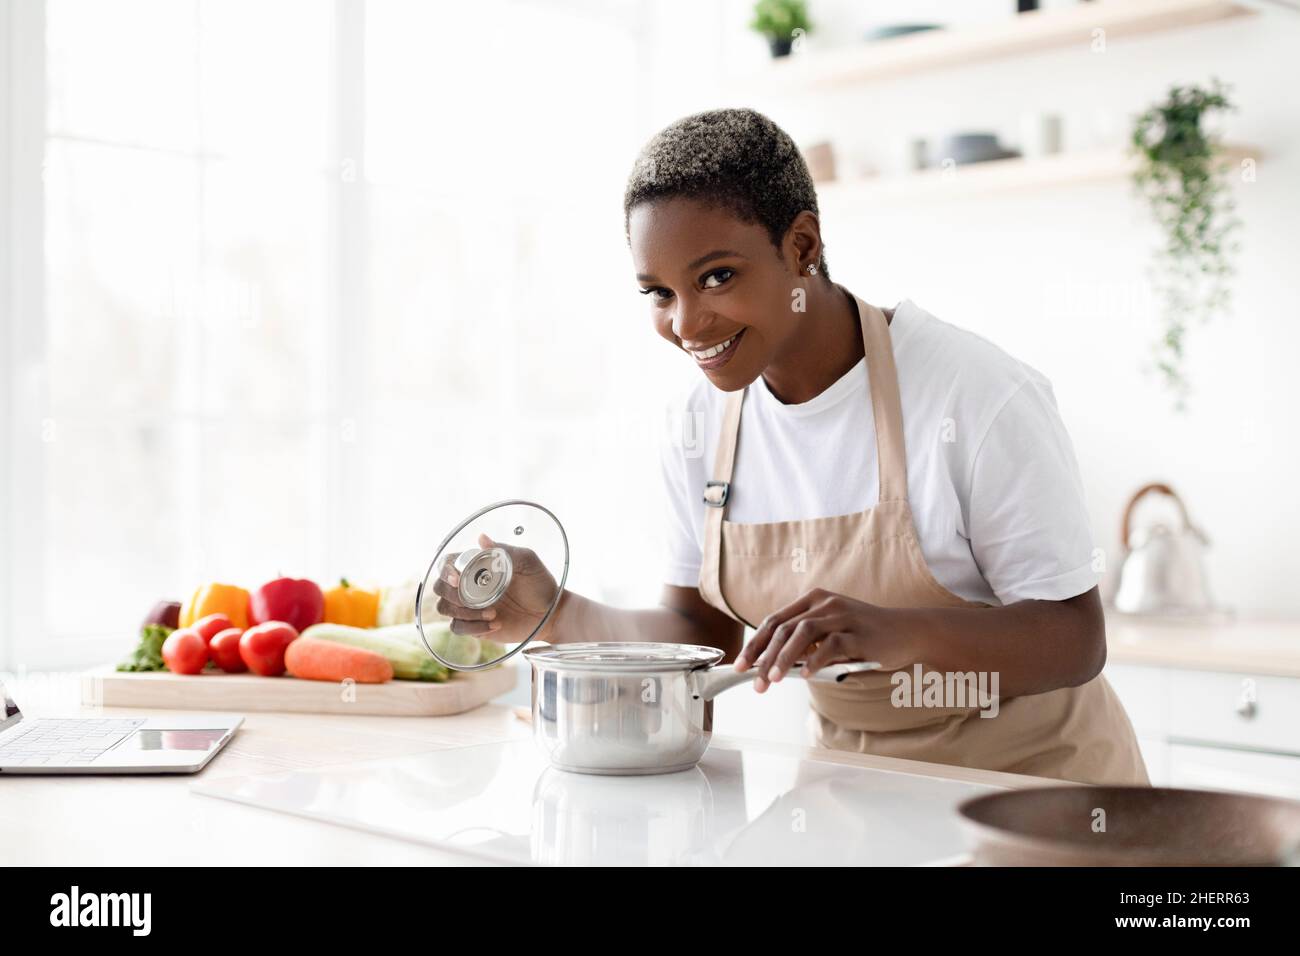 Smiling young african american woman in apron prepare eat and smell dish in minimalist kitchen interior Stock Photo